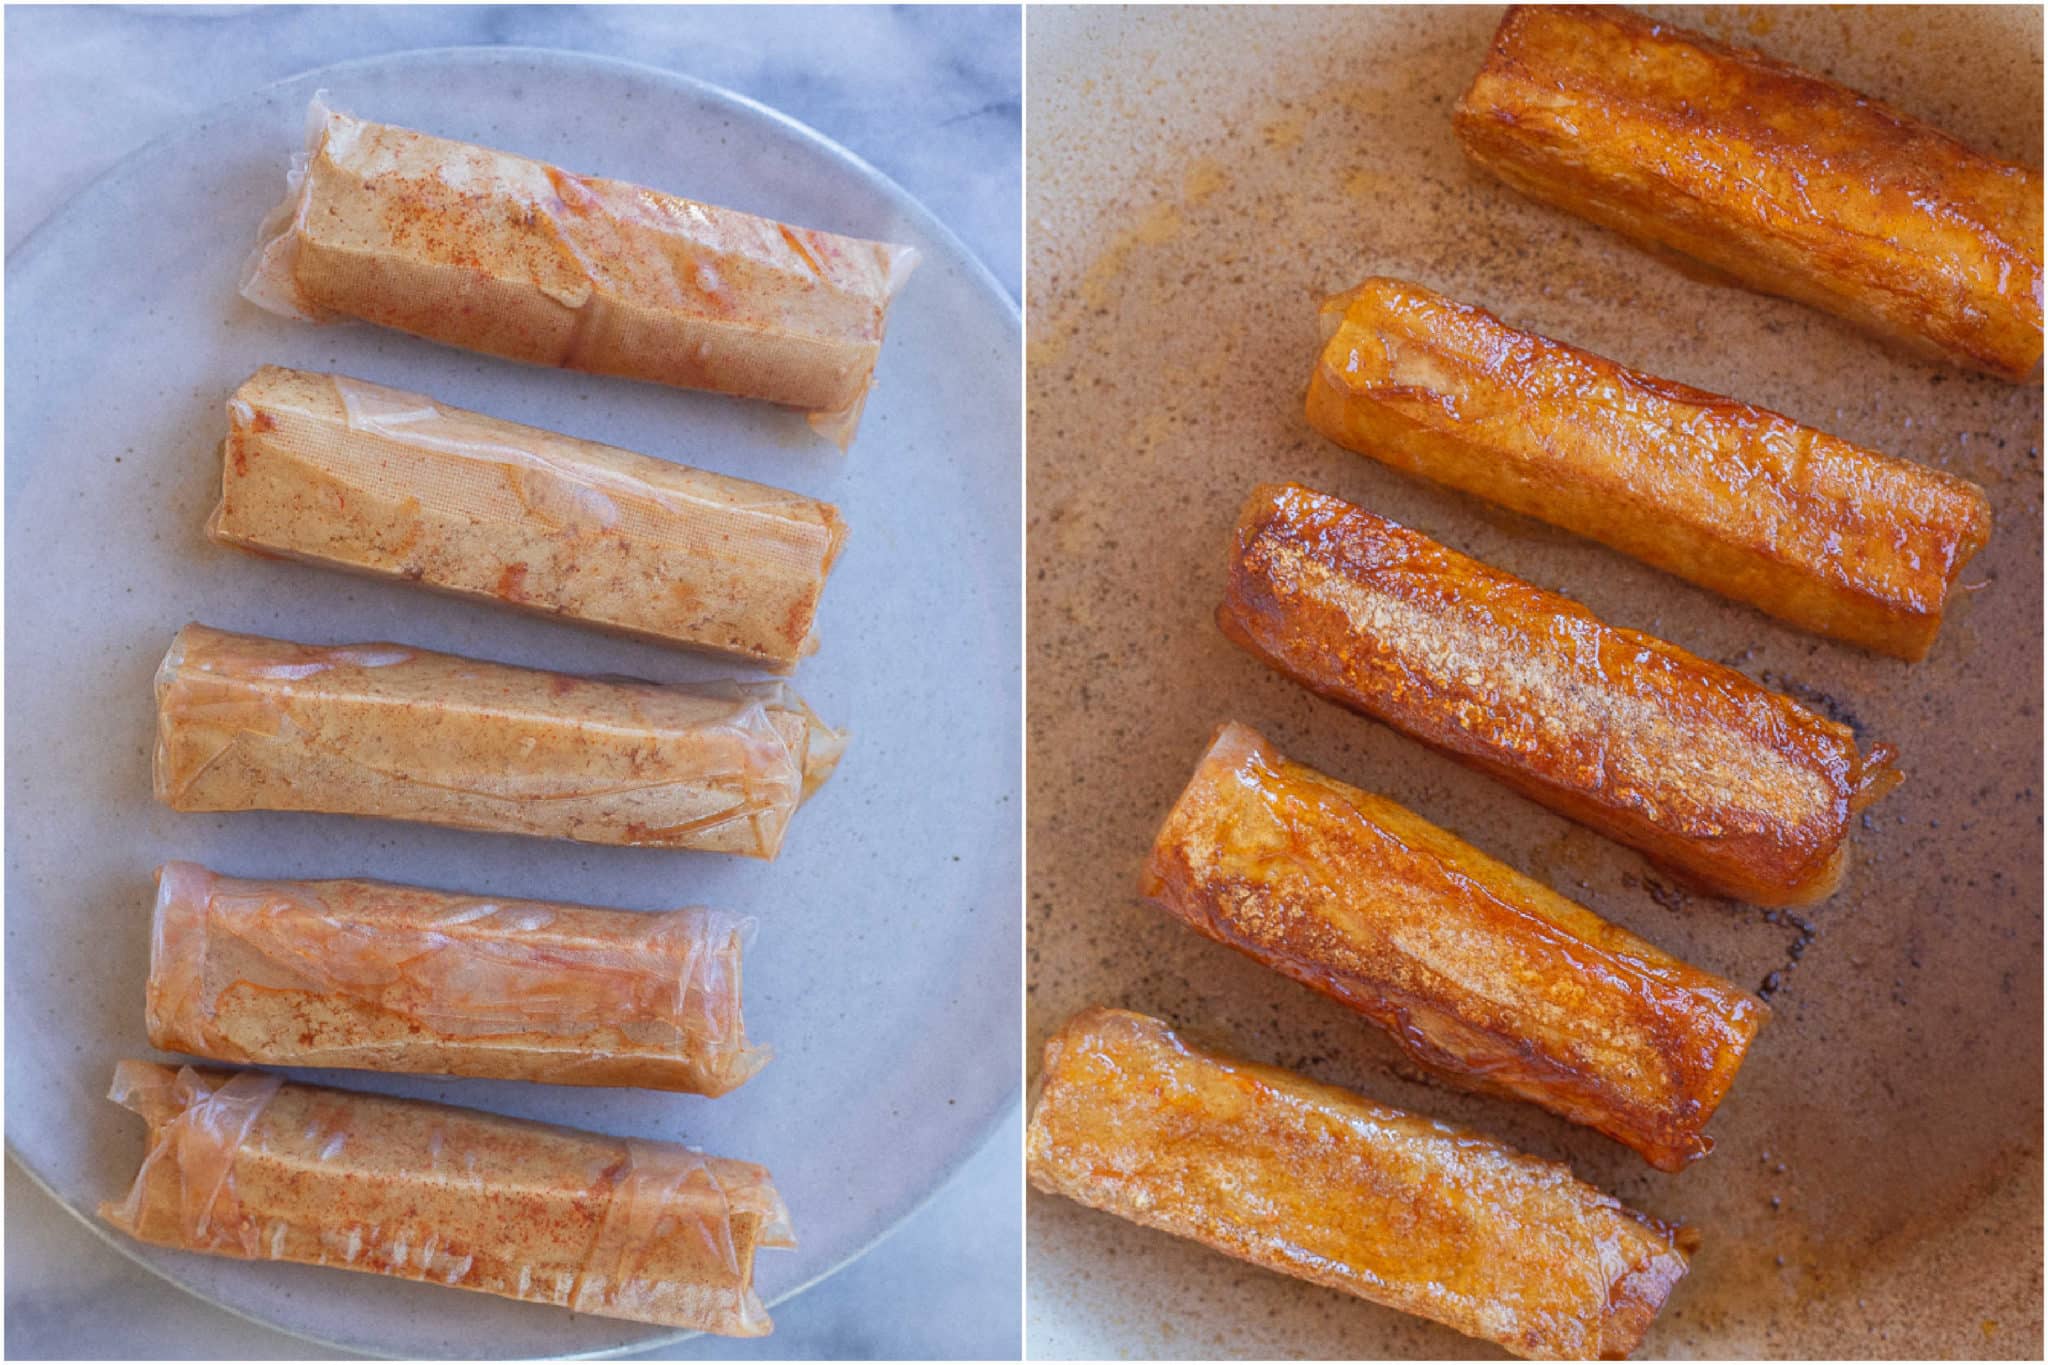 tofu hot dogs before and after they have been cooked